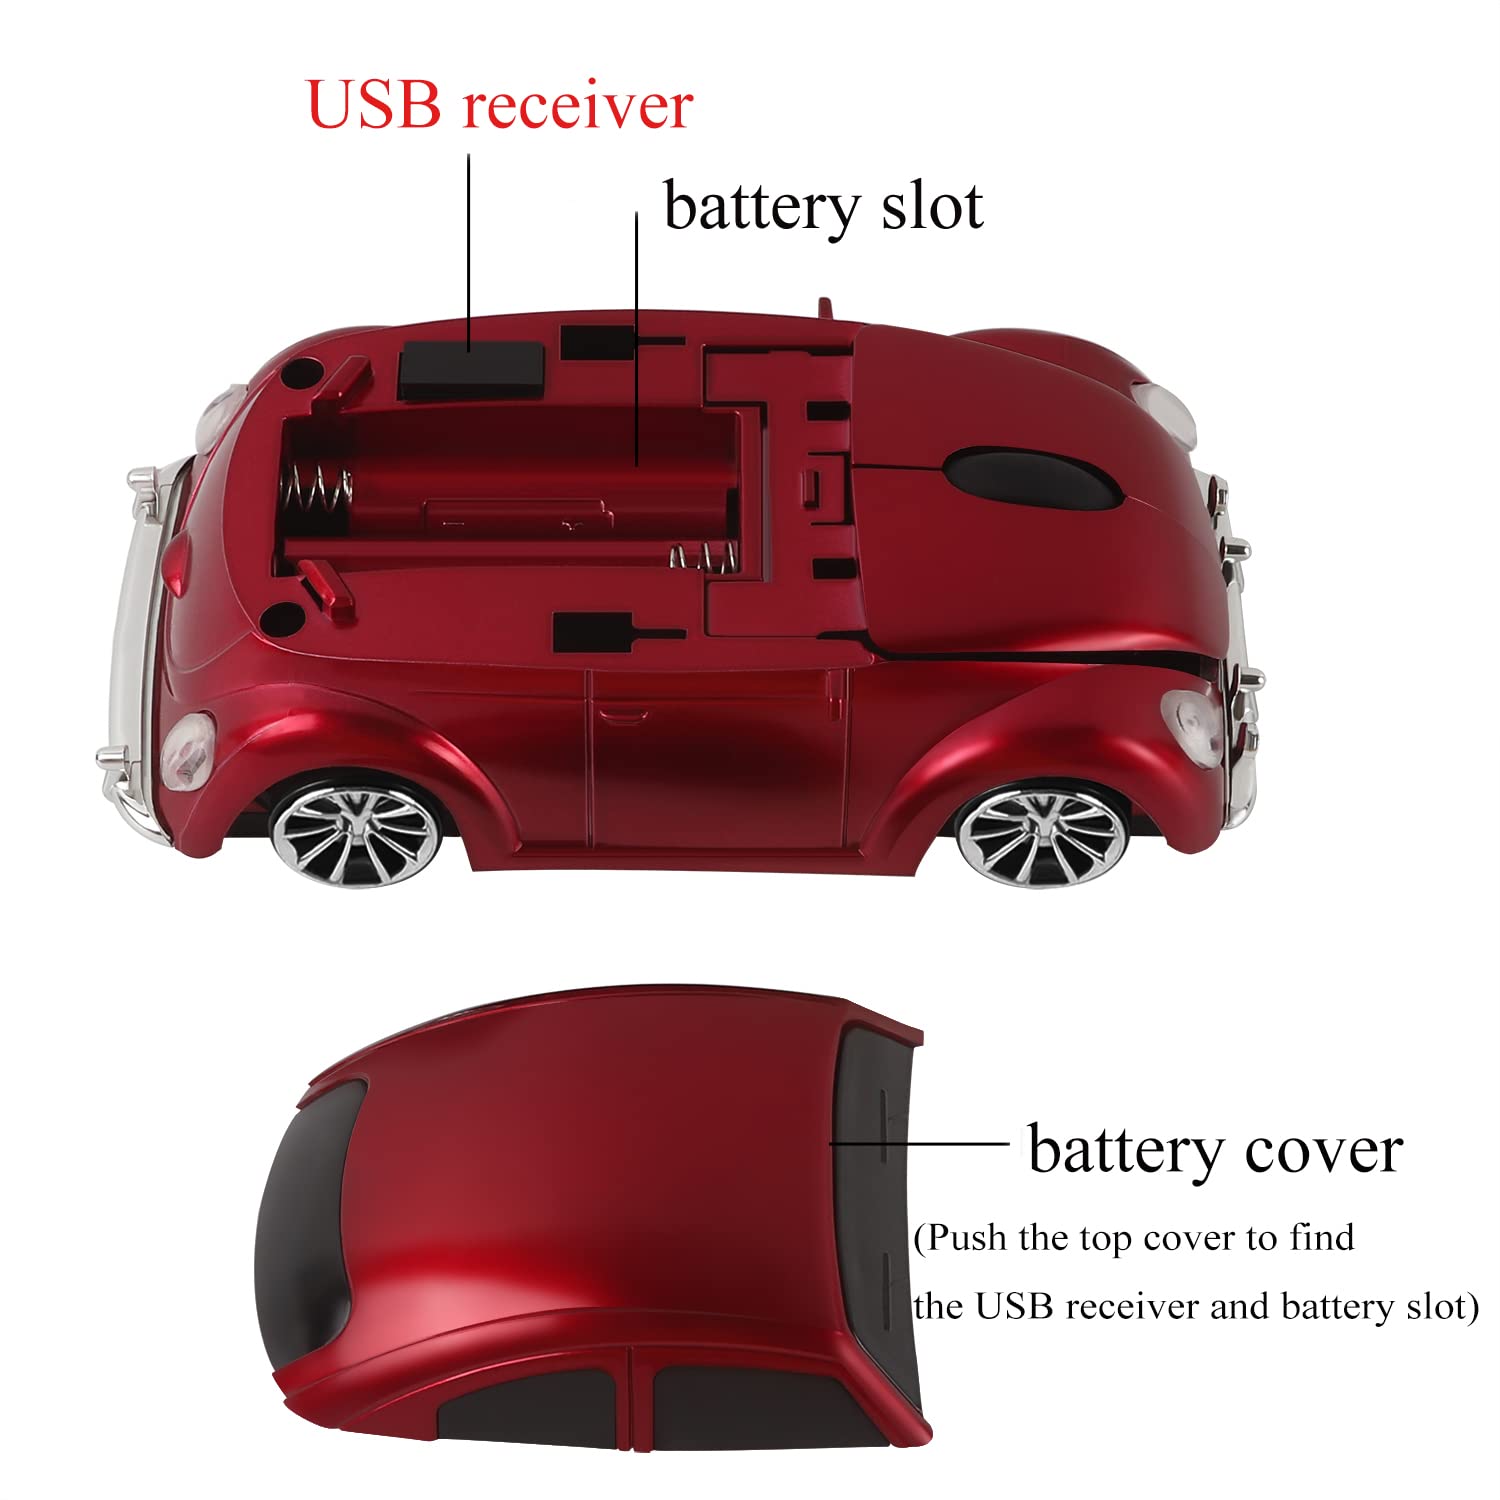 Usbkingdom 2.4GHz Sport Car Shape Computer Mice USB Wireless Mouse 1600DPI Optical USB Mouse for PC Laptop Red